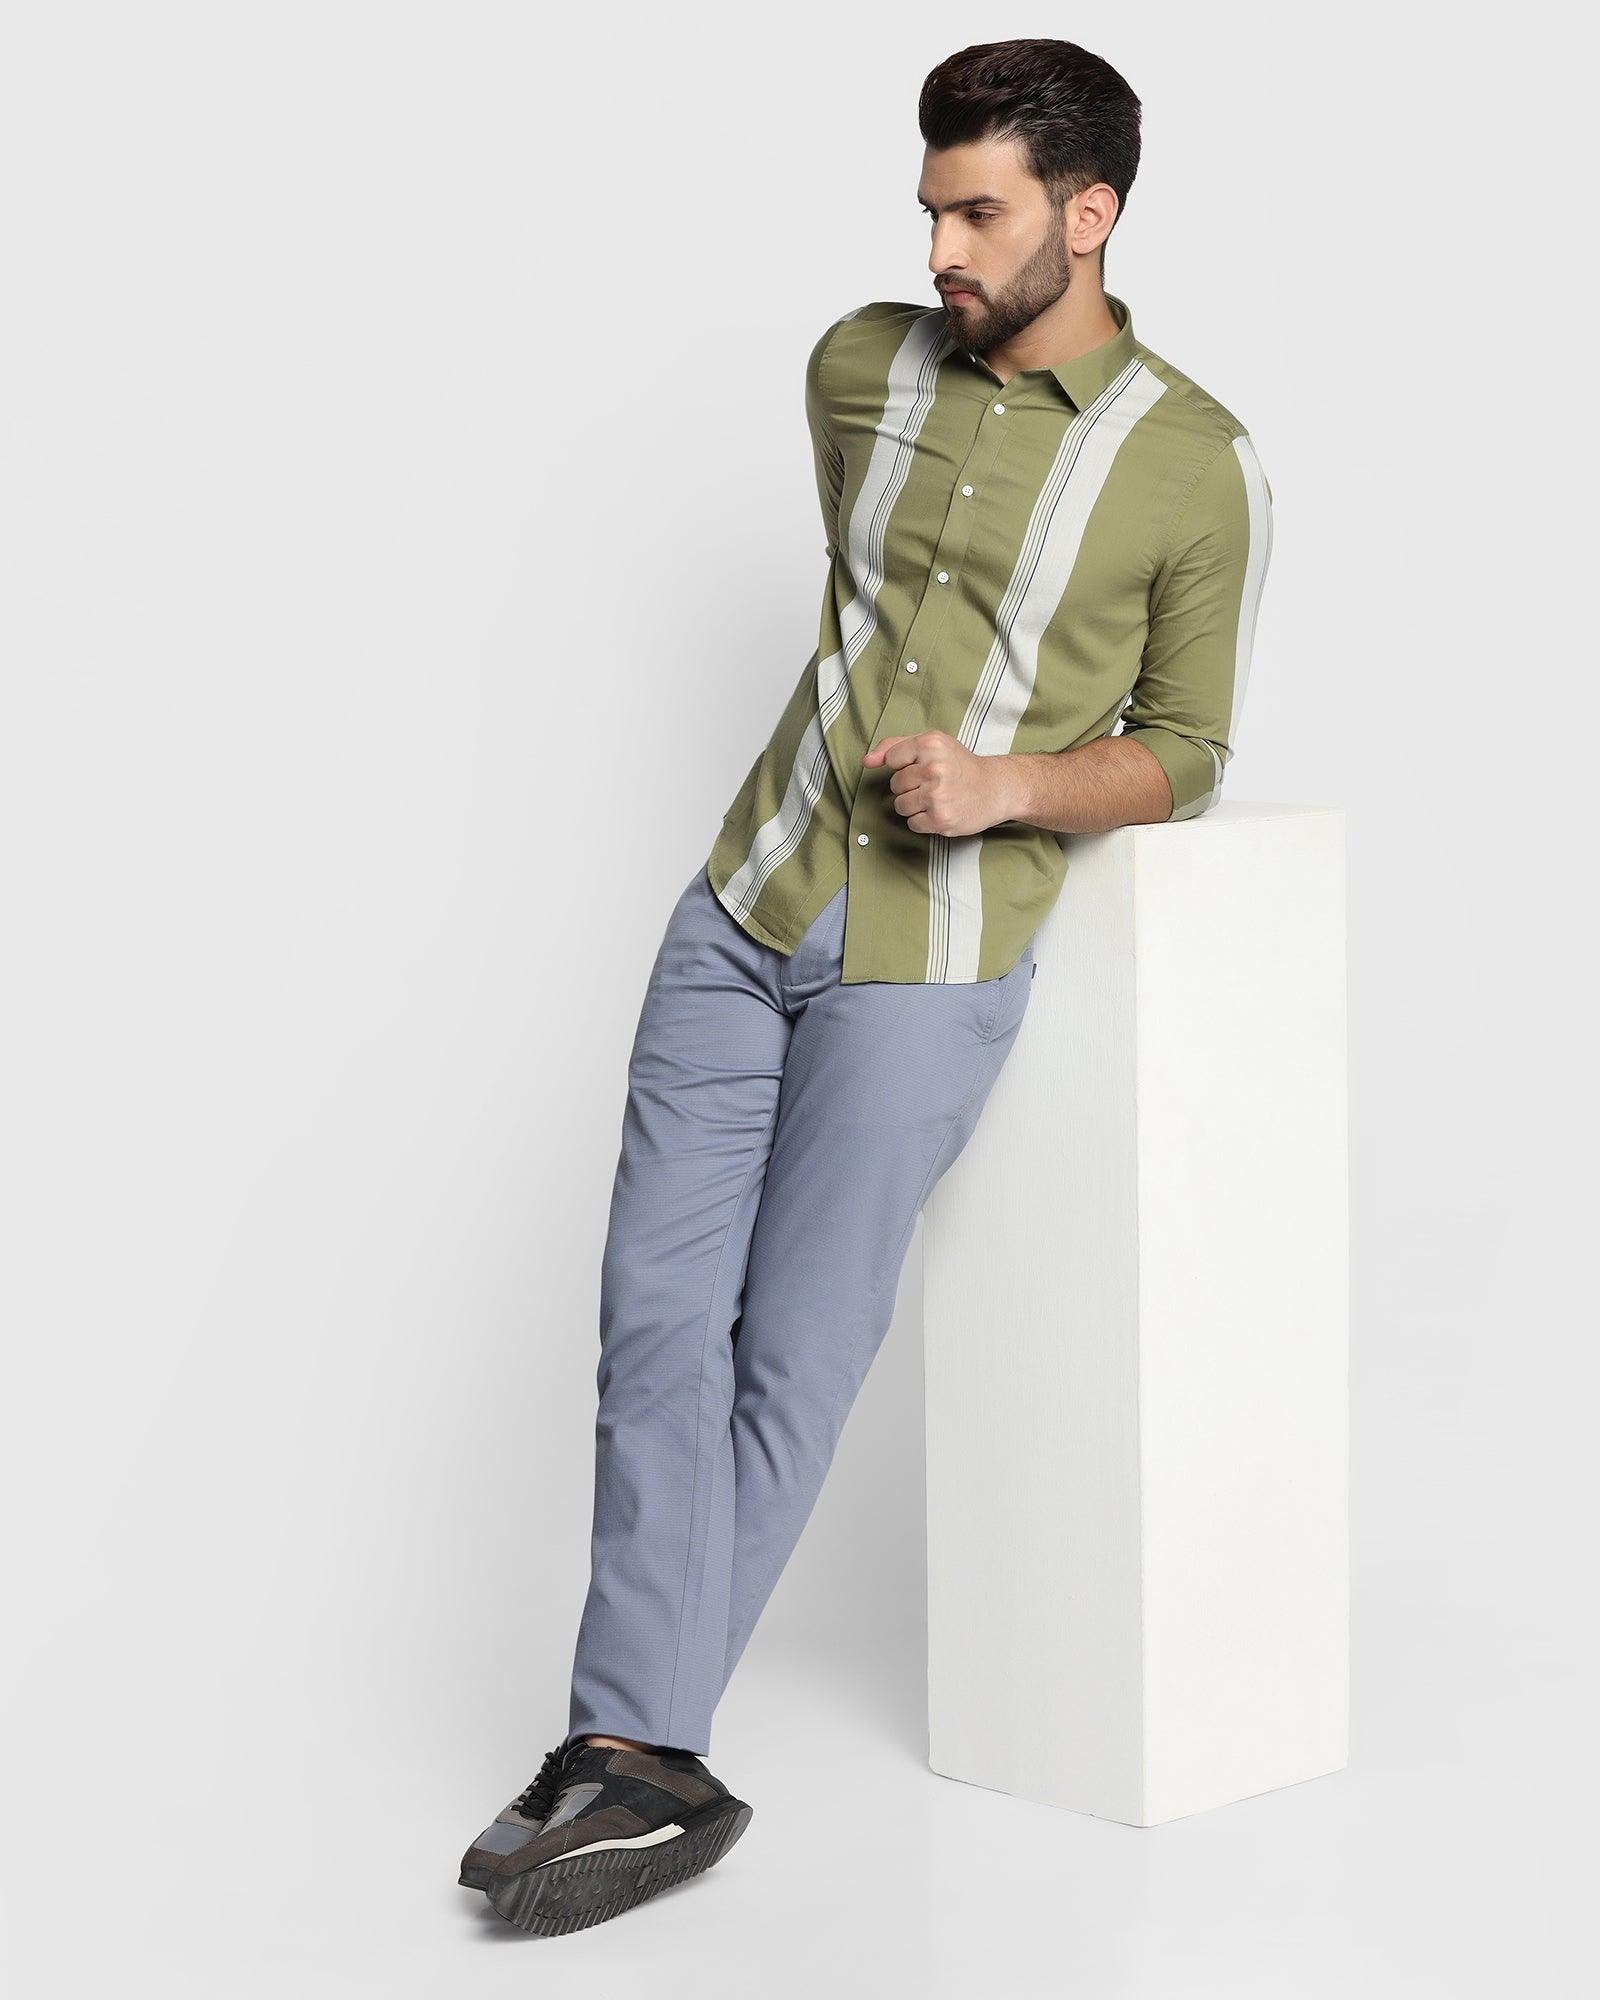 Casual Olive Striped Shirt - Flake